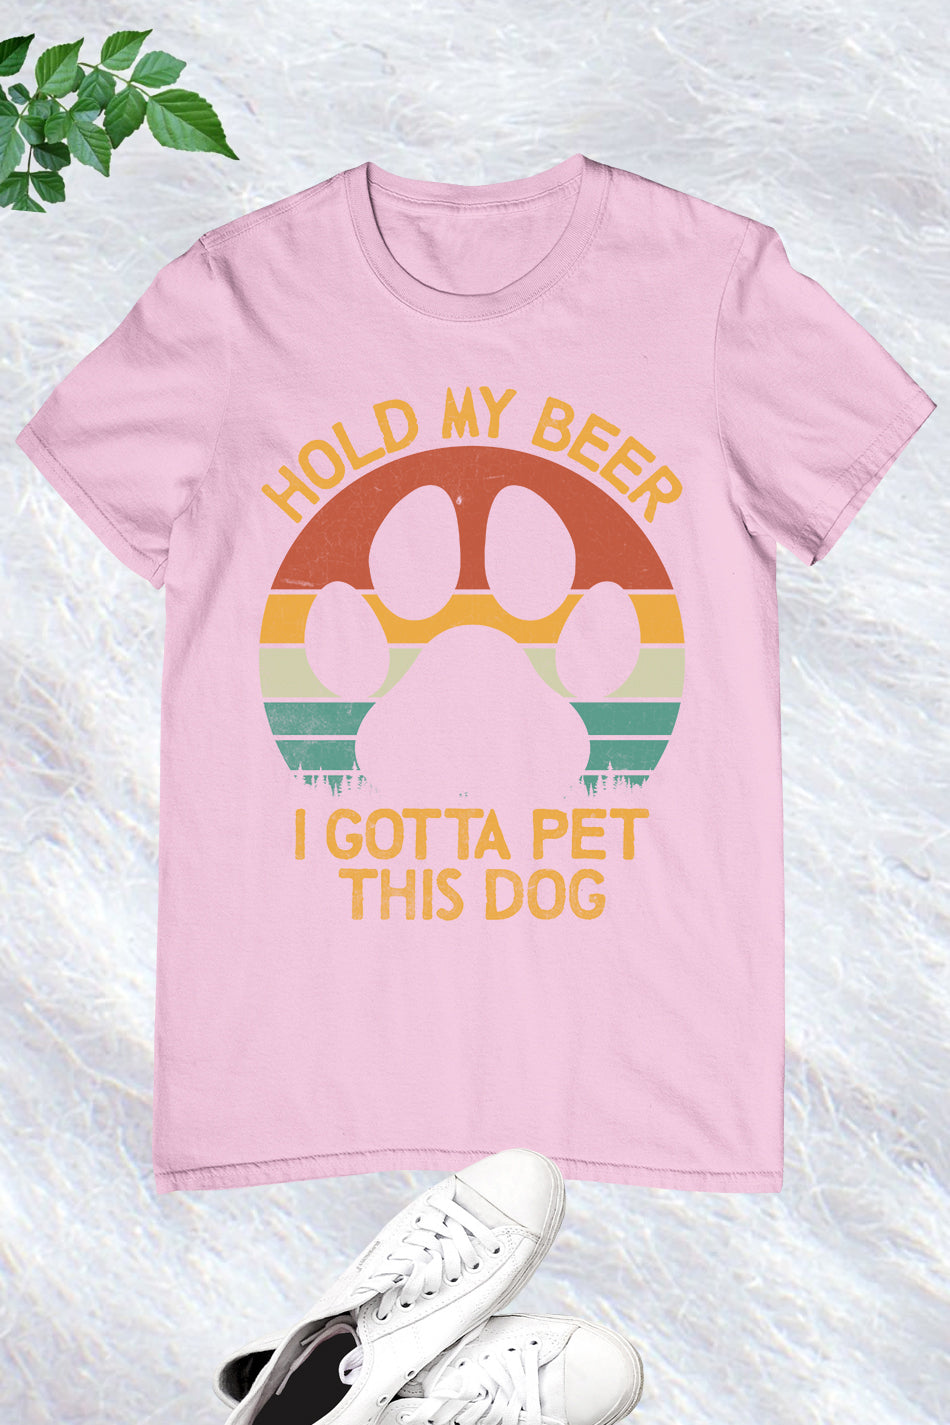 Hold My Beer I Gotta Pet This Dog Tshirt